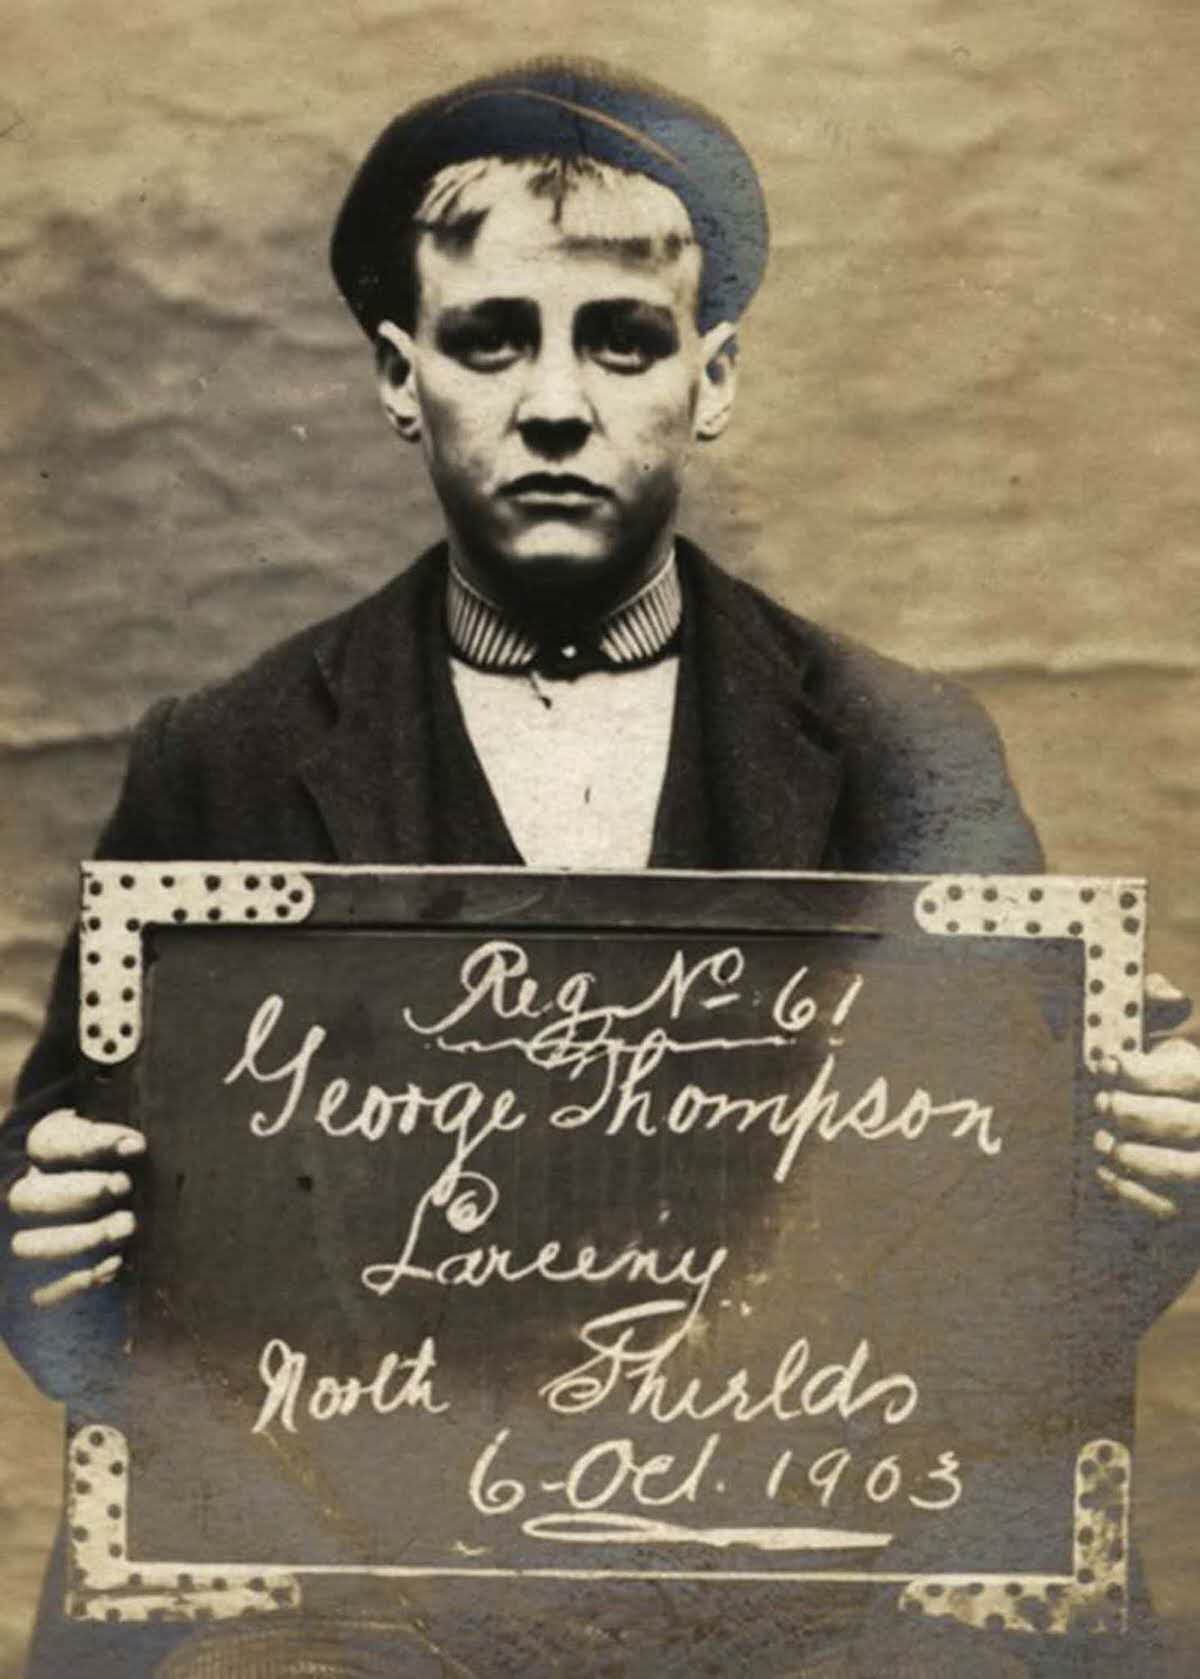 George Thompson, 17, arrested for stealing from a ship chandler’s store, 1903.